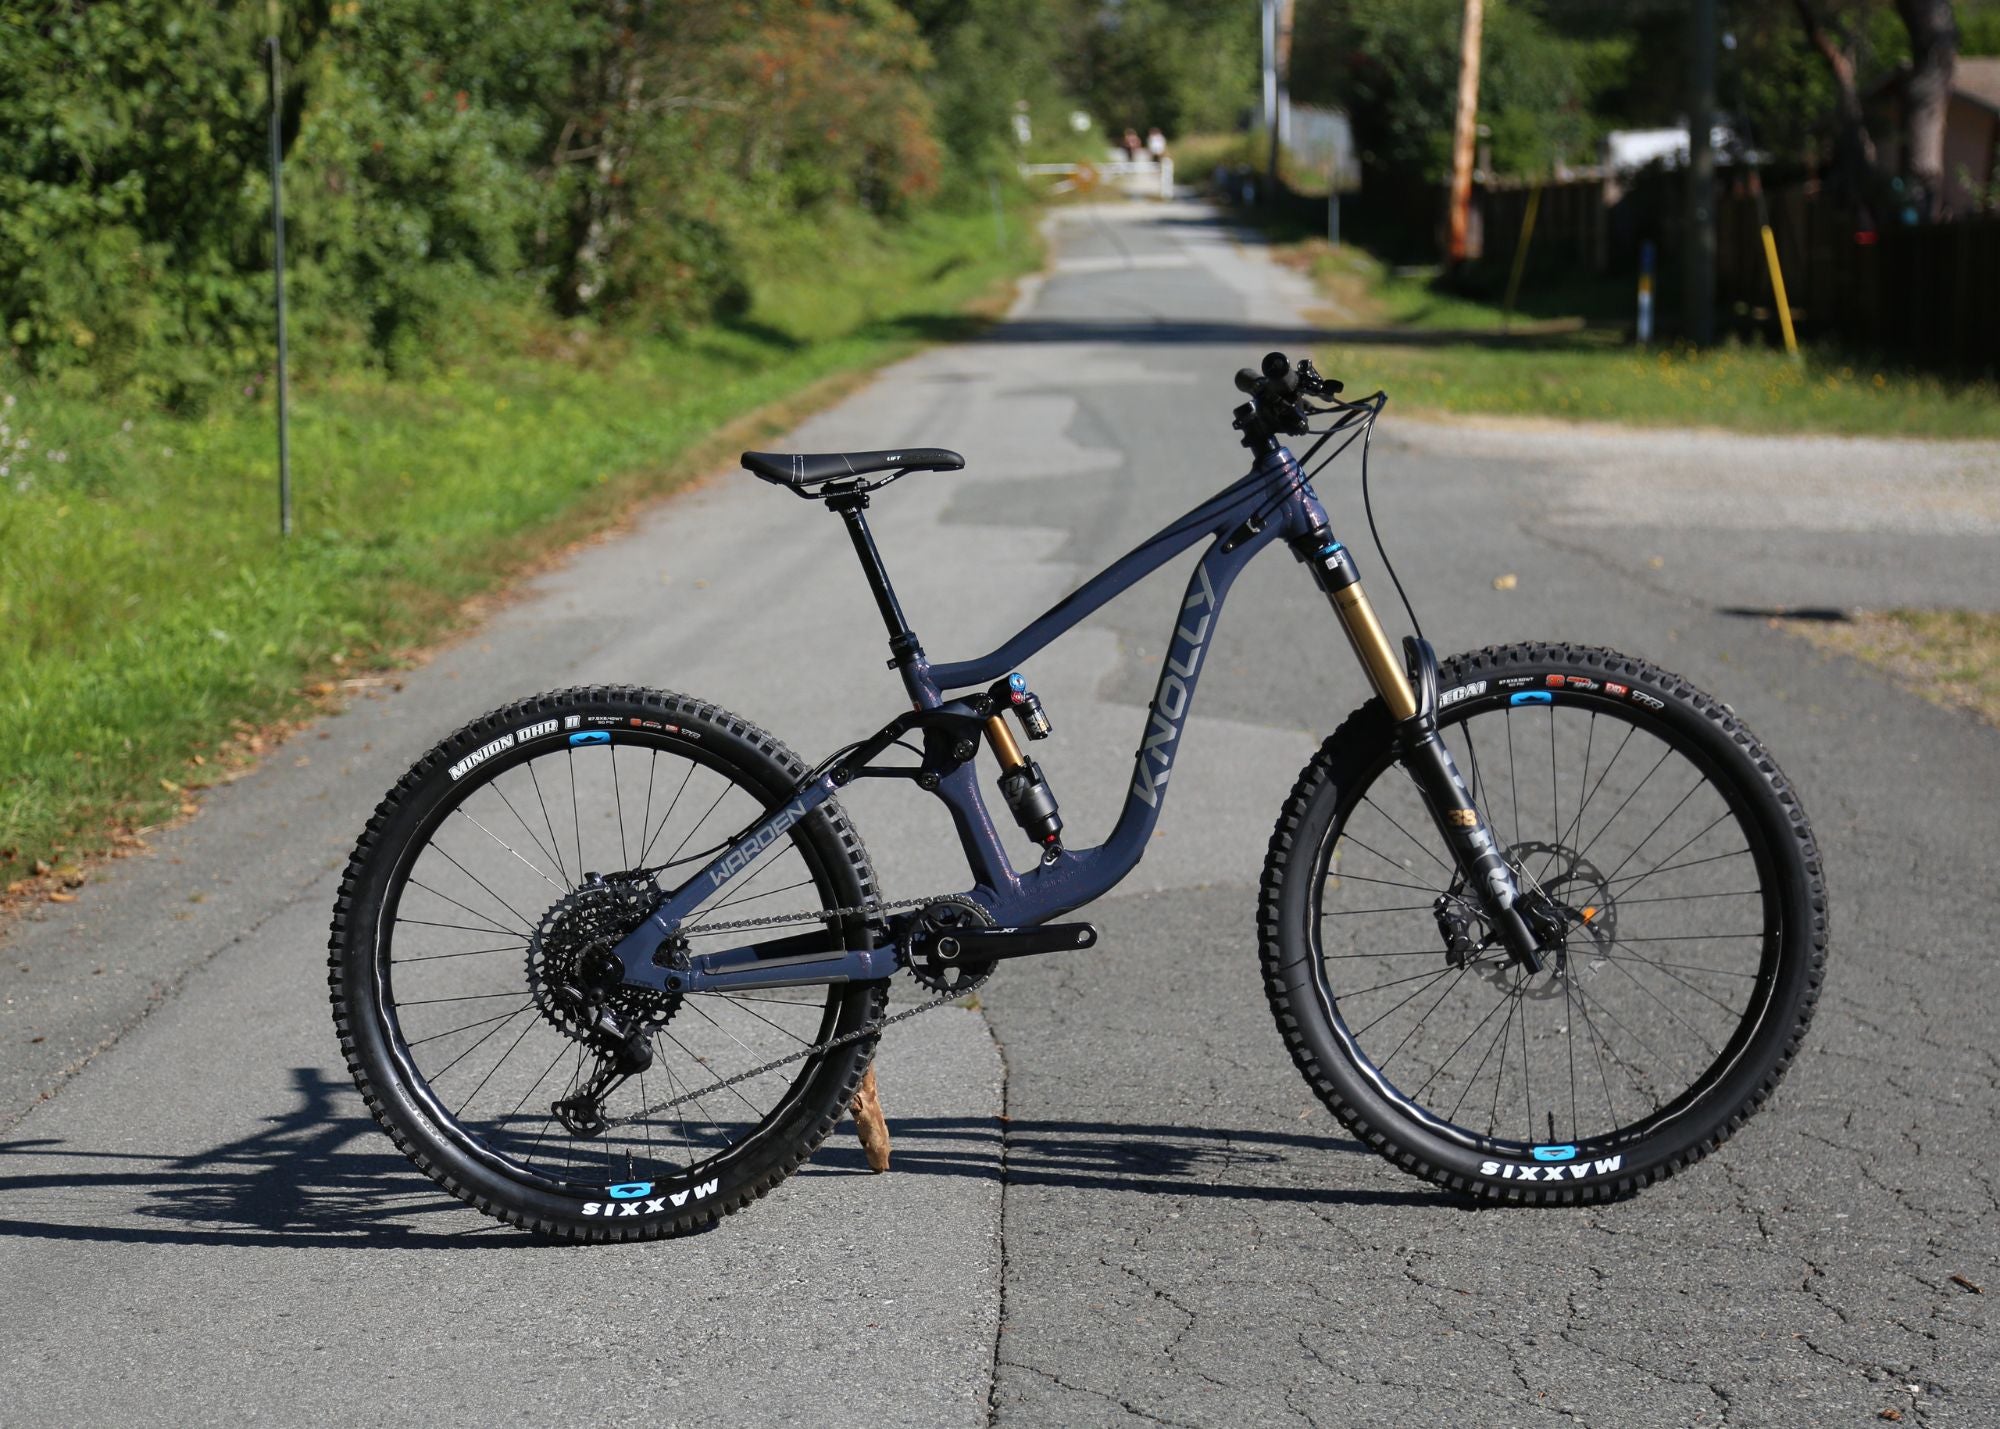 Did you know that Knolly does a Limited Edition Run for each of their bike models?